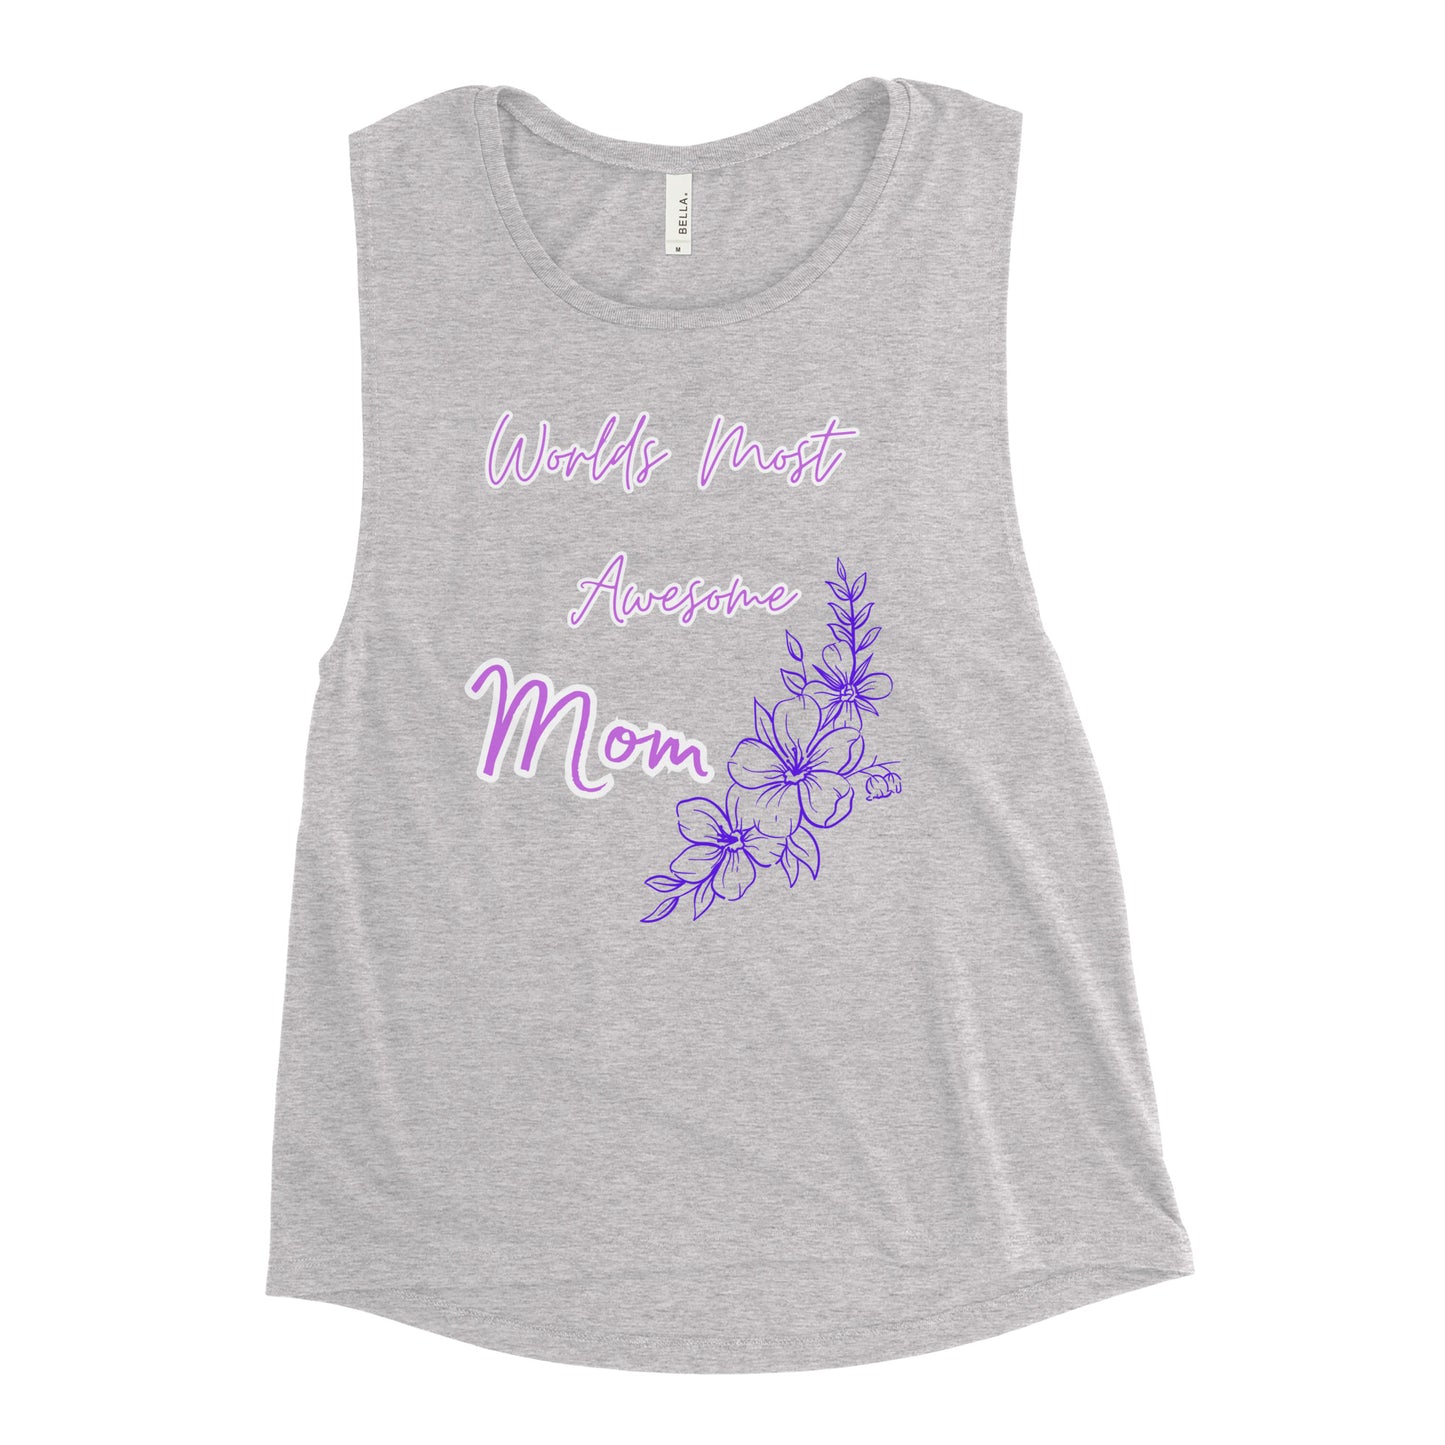 Worlds Most Awesome Mom, Ladies’ Muscle Tank